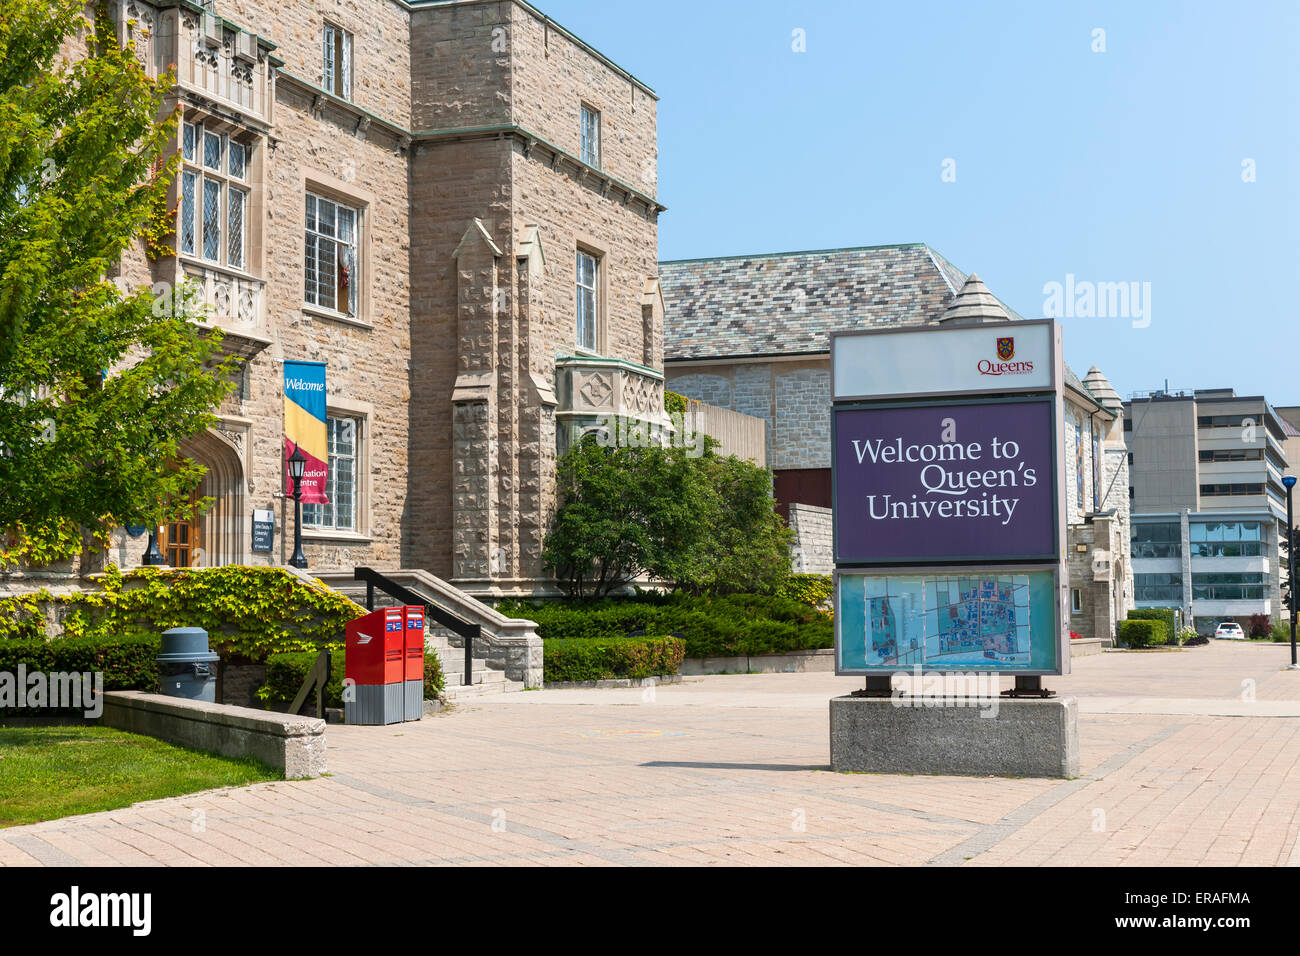 KINGSTON, CANADA - AUGUST 2, 2014: Welcome sign on Queen's university campus next to Students Memorial Union building in Kingsto Stock Photo